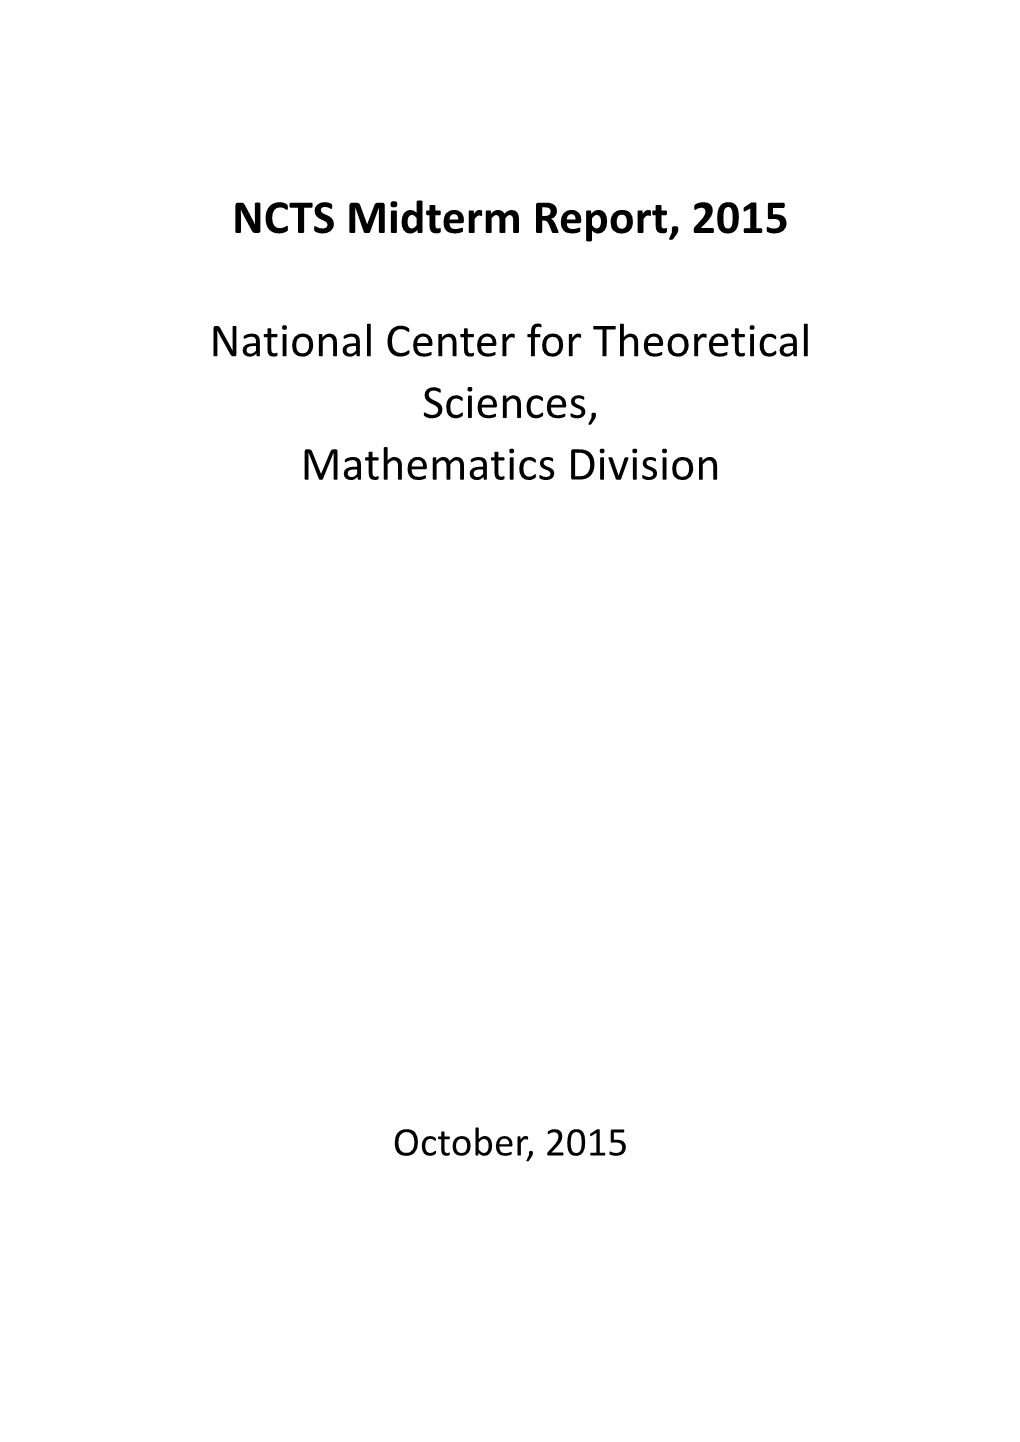 NCTS Midterm Report, 2015 National Center for Theoretical Sciences